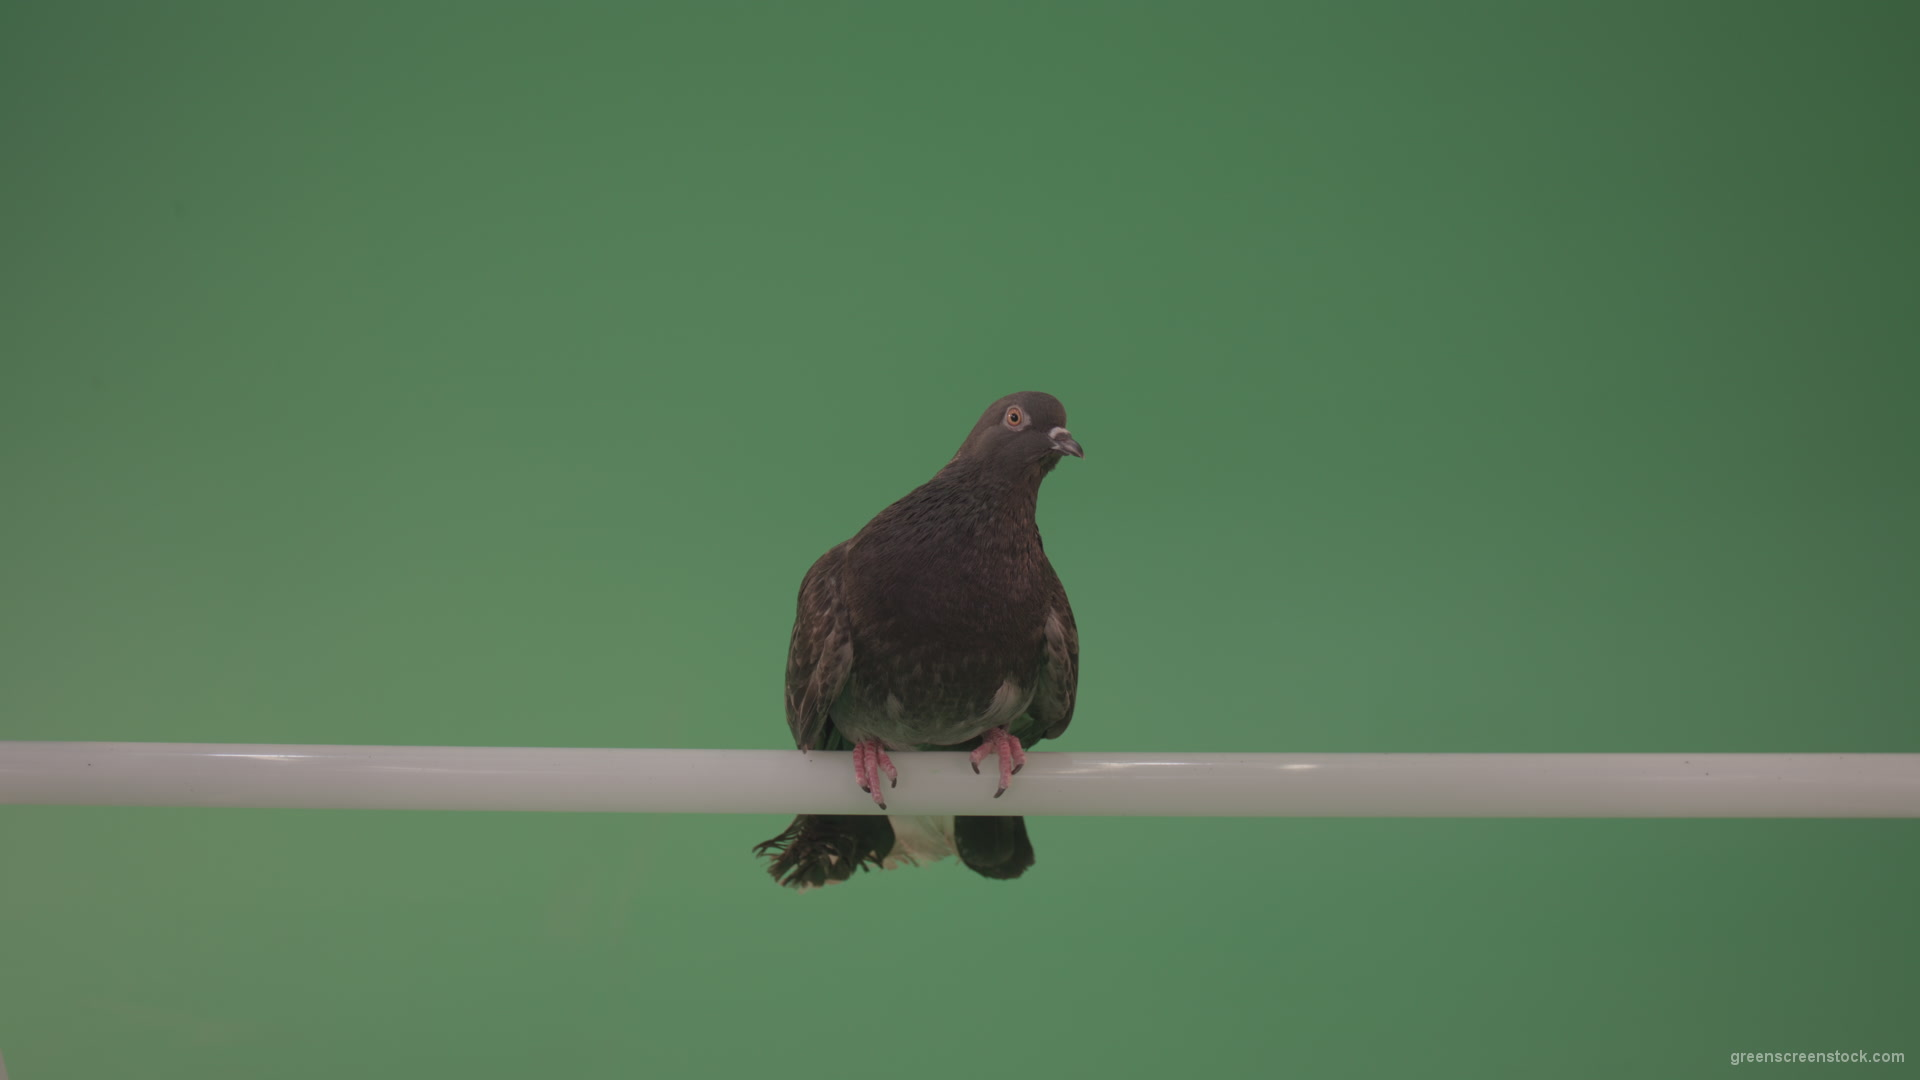 Wild-bird-doves-sit-on-the-branch-and-peer-around-isolated-on-green-screen_009 Green Screen Stock